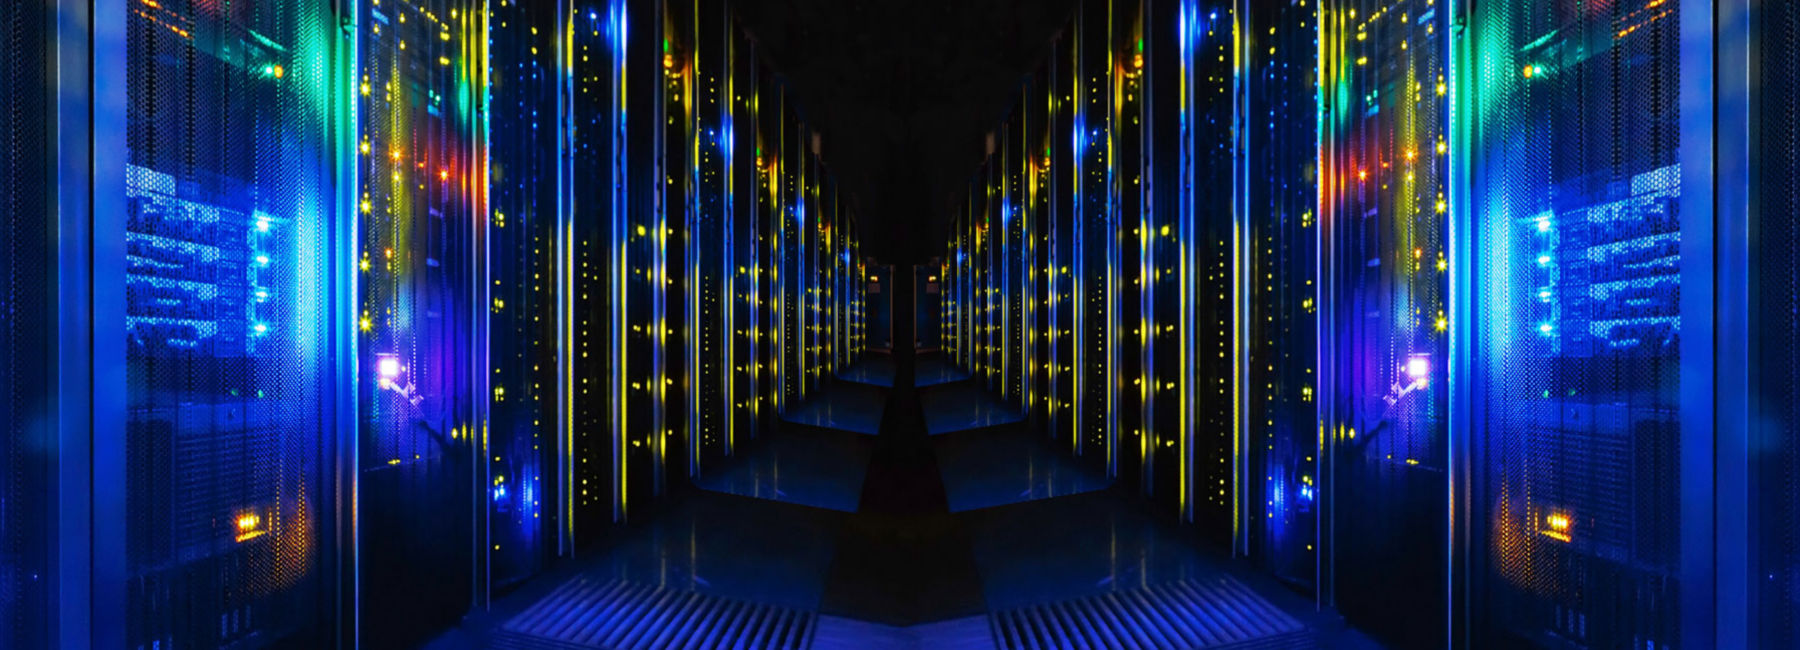 Modernizing your mainframe? Here’s how to do cloud the right way